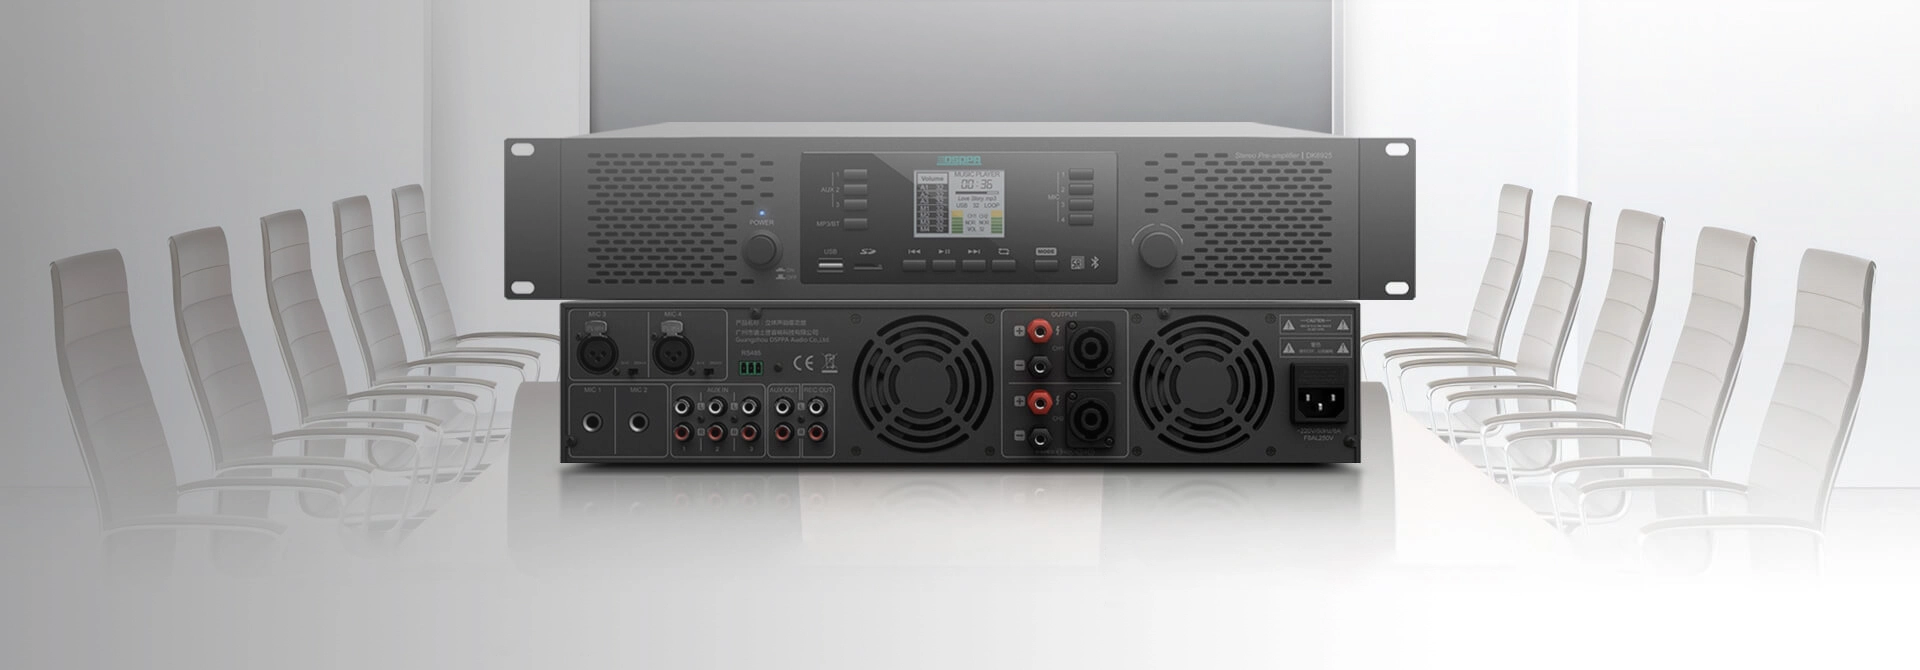 Conference Digital Mixer Amplifier Solution for Small and Medium-Sized Conference Rooms